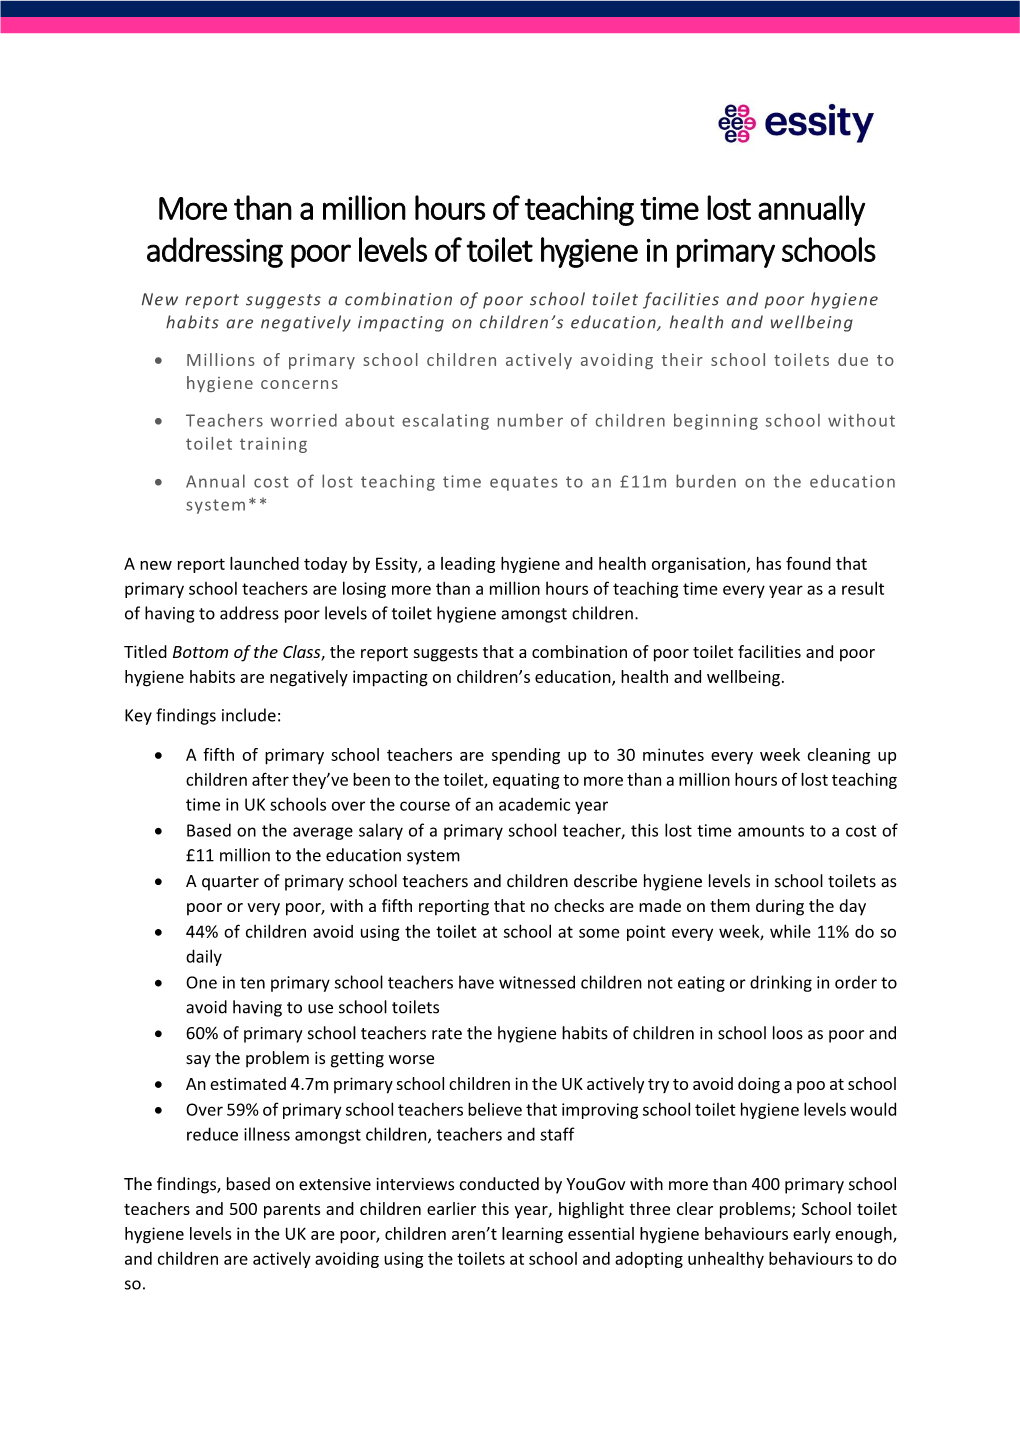 Than a Million Hours of Teaching Time Lost Annually Addressing Poor Levels of Toilet Hygiene in Primary Schools